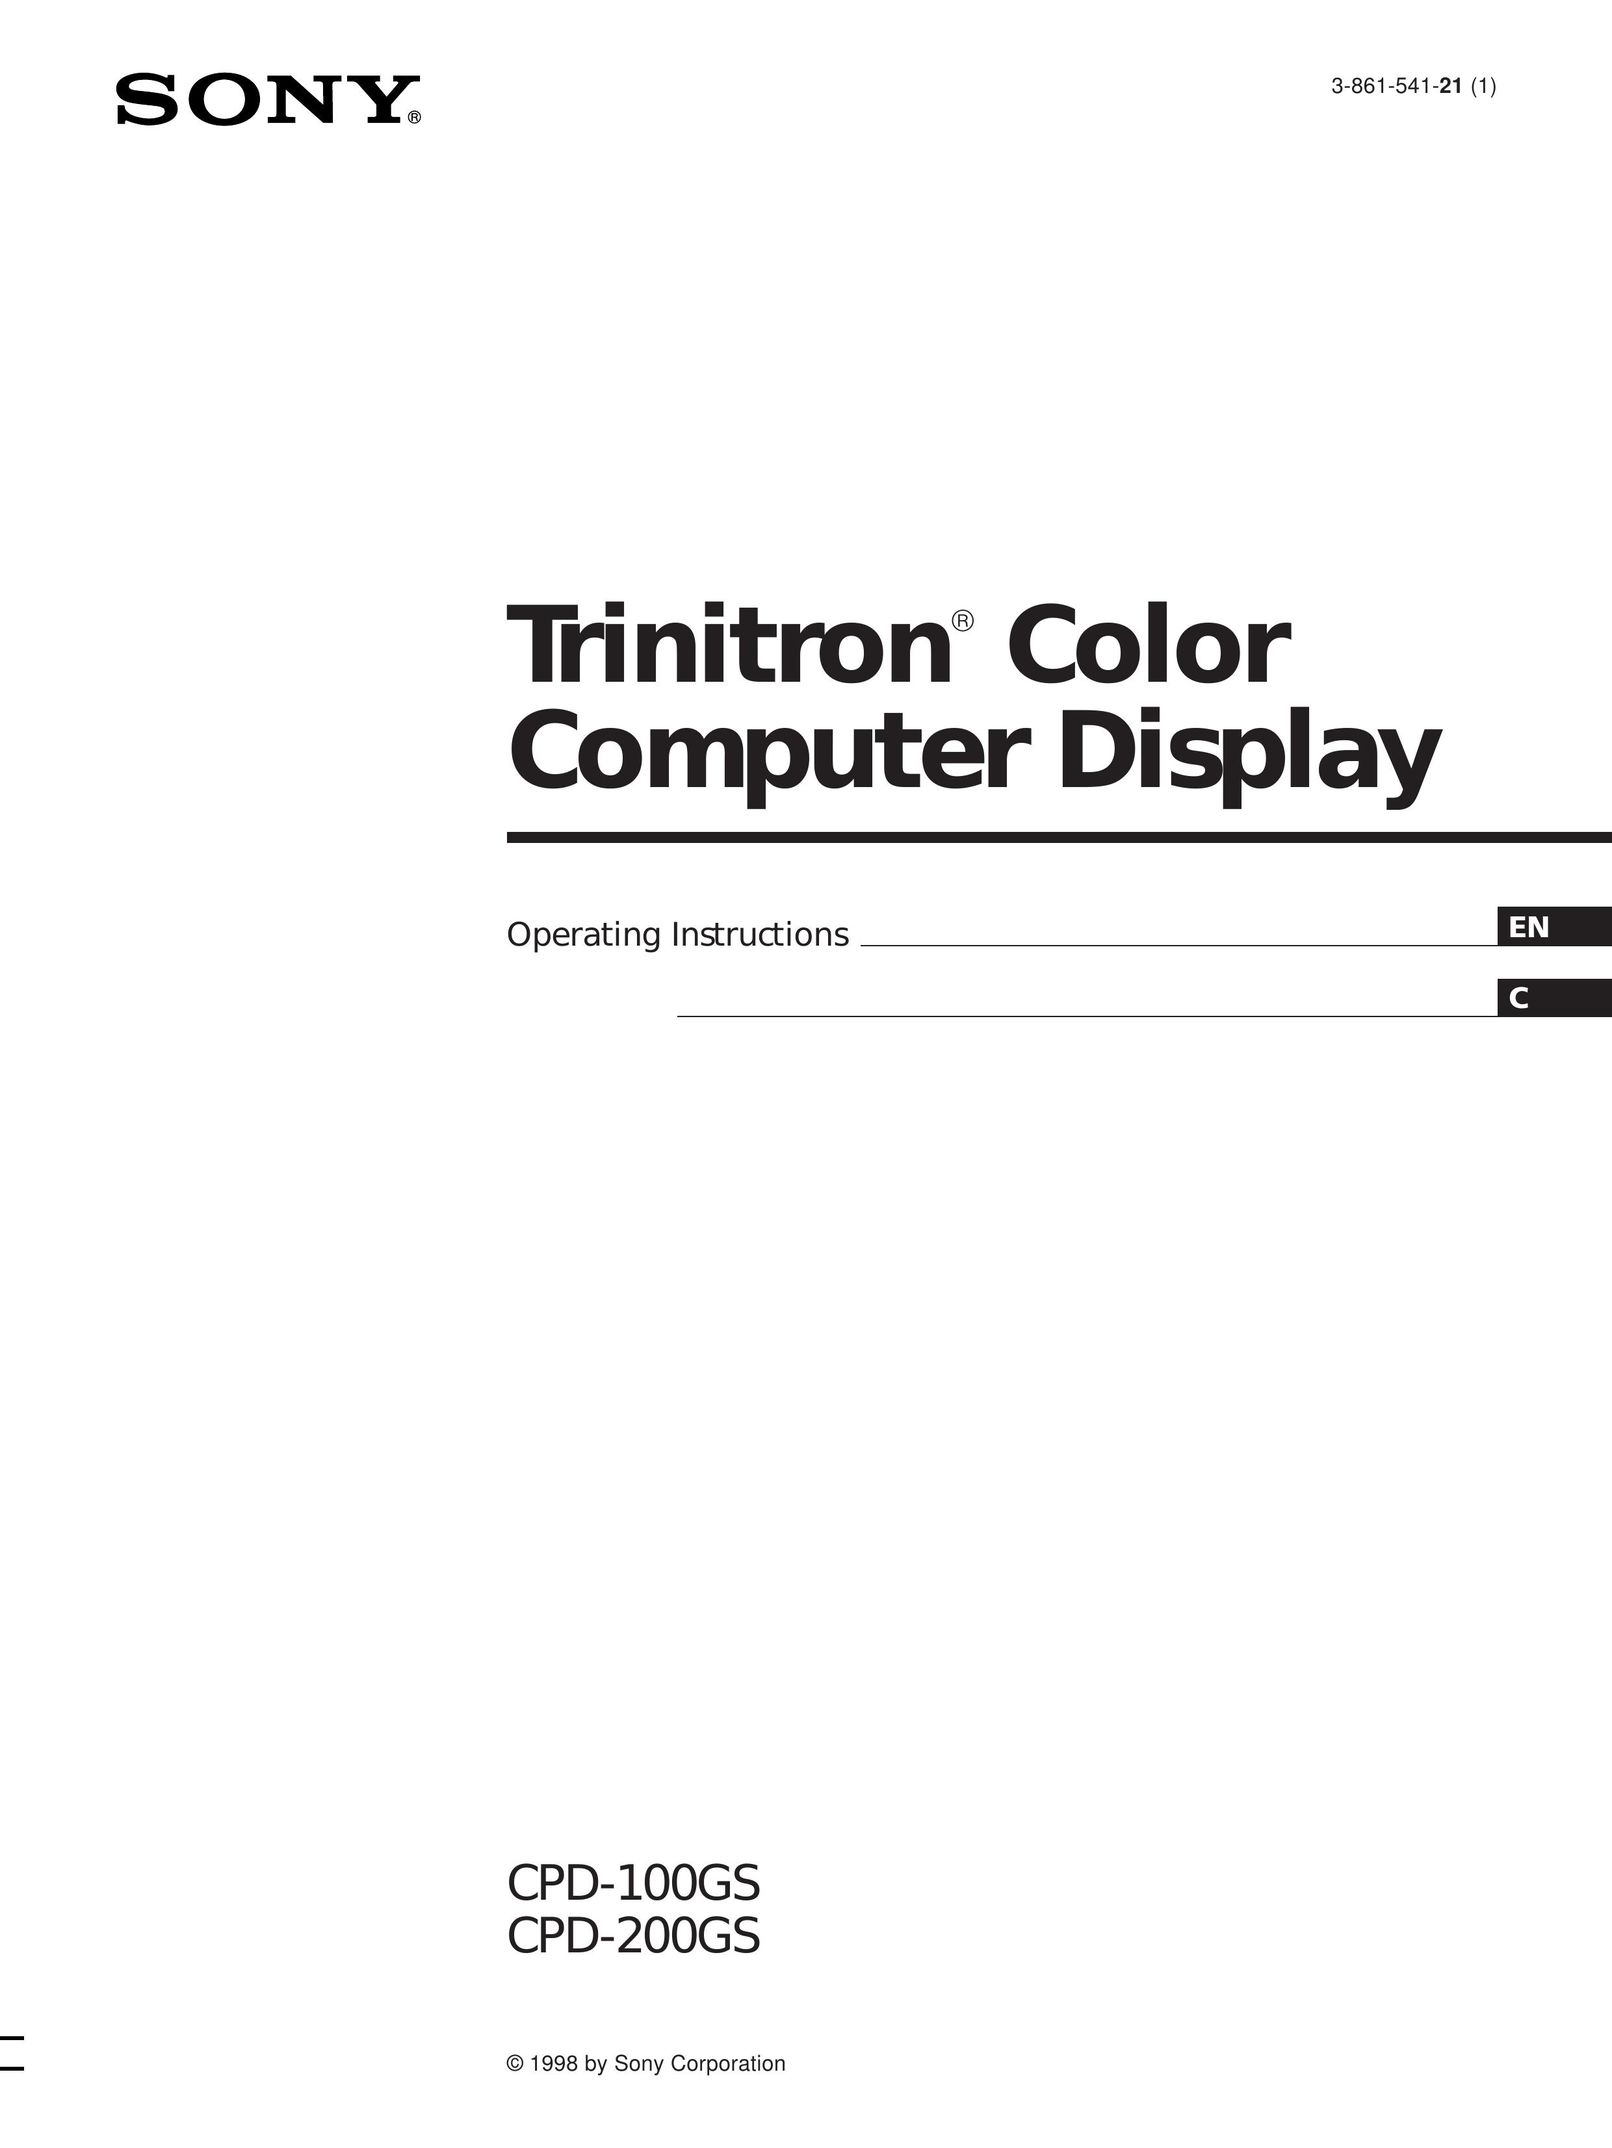 Sony CPD-100GS Computer Monitor User Manual